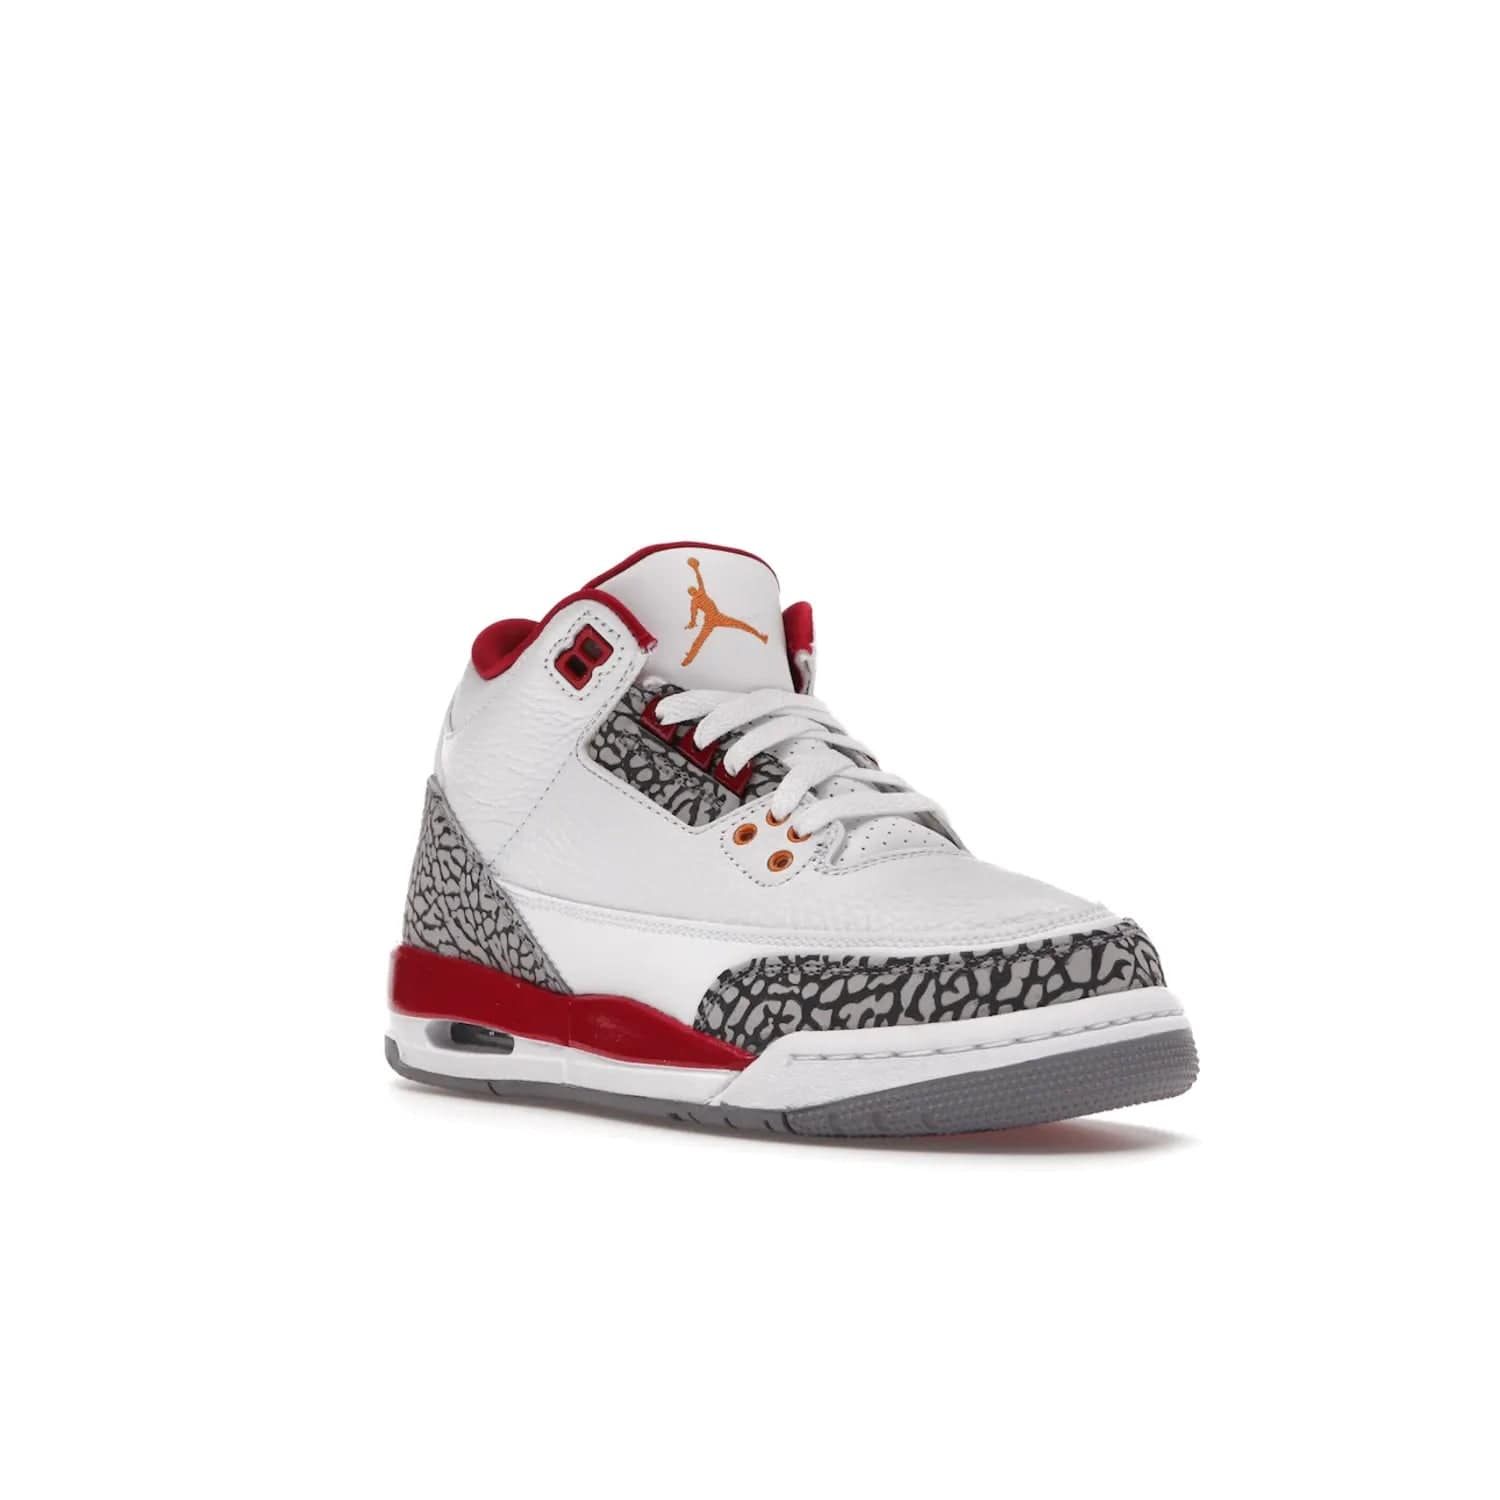 Jordan 3 Retro Cardinal (GS) - Image 6 - Only at www.BallersClubKickz.com - Shop the kid-sized Air Jordan 3 Retro Cardinal GS, released Feb 2022. White tumbled leather upper, light curry accenting, cement grey and classic red details throughout. Visible Air cushioning, midsole, and an eye-catching outsole. Show off your style with this fashionable streetwear silhouette.